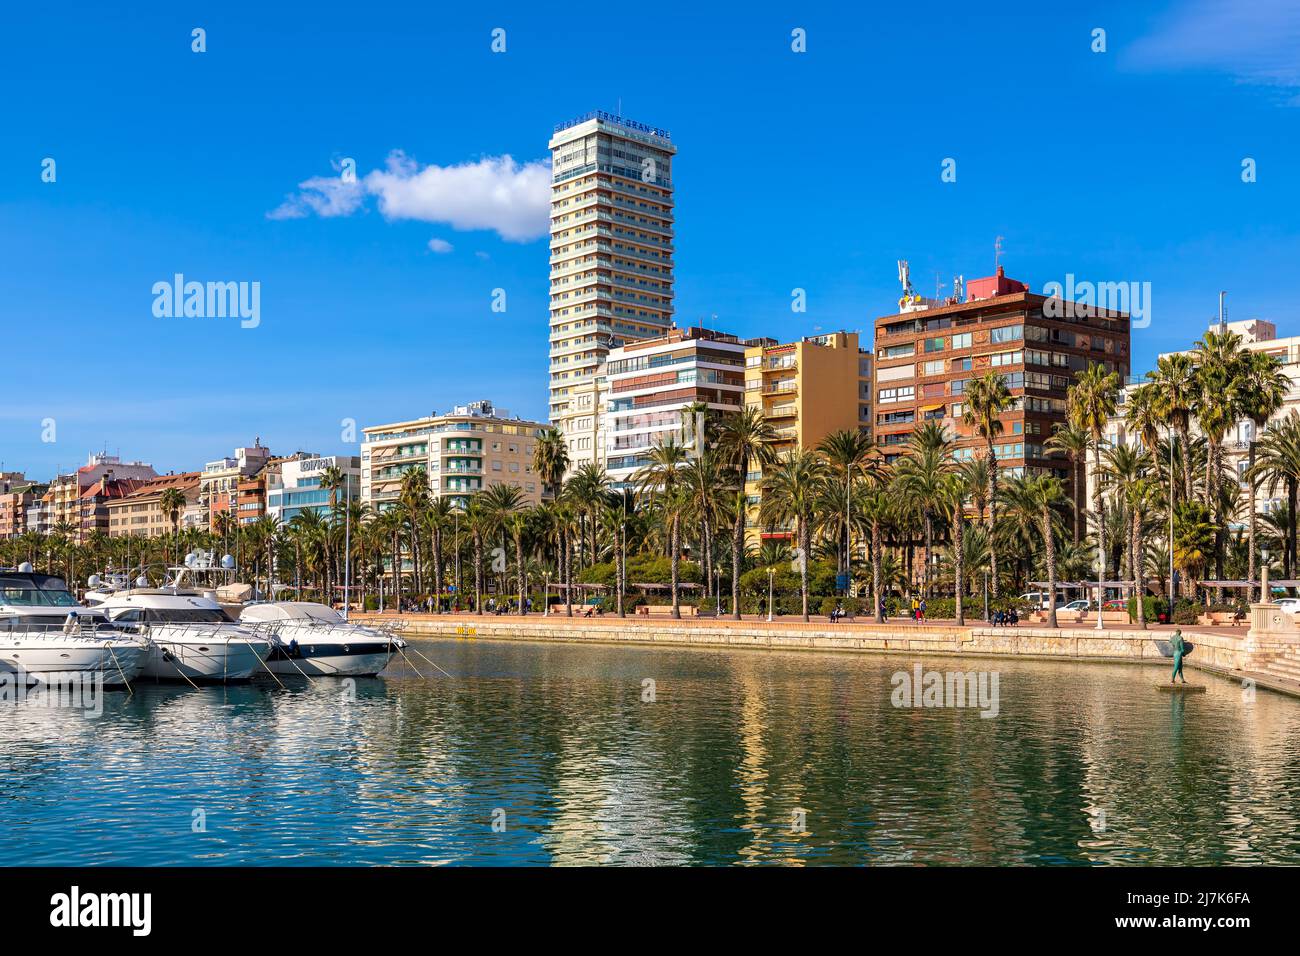 Promenade with palms and buildings on background as seen from marina in Alicante, Spain. Stock Photo